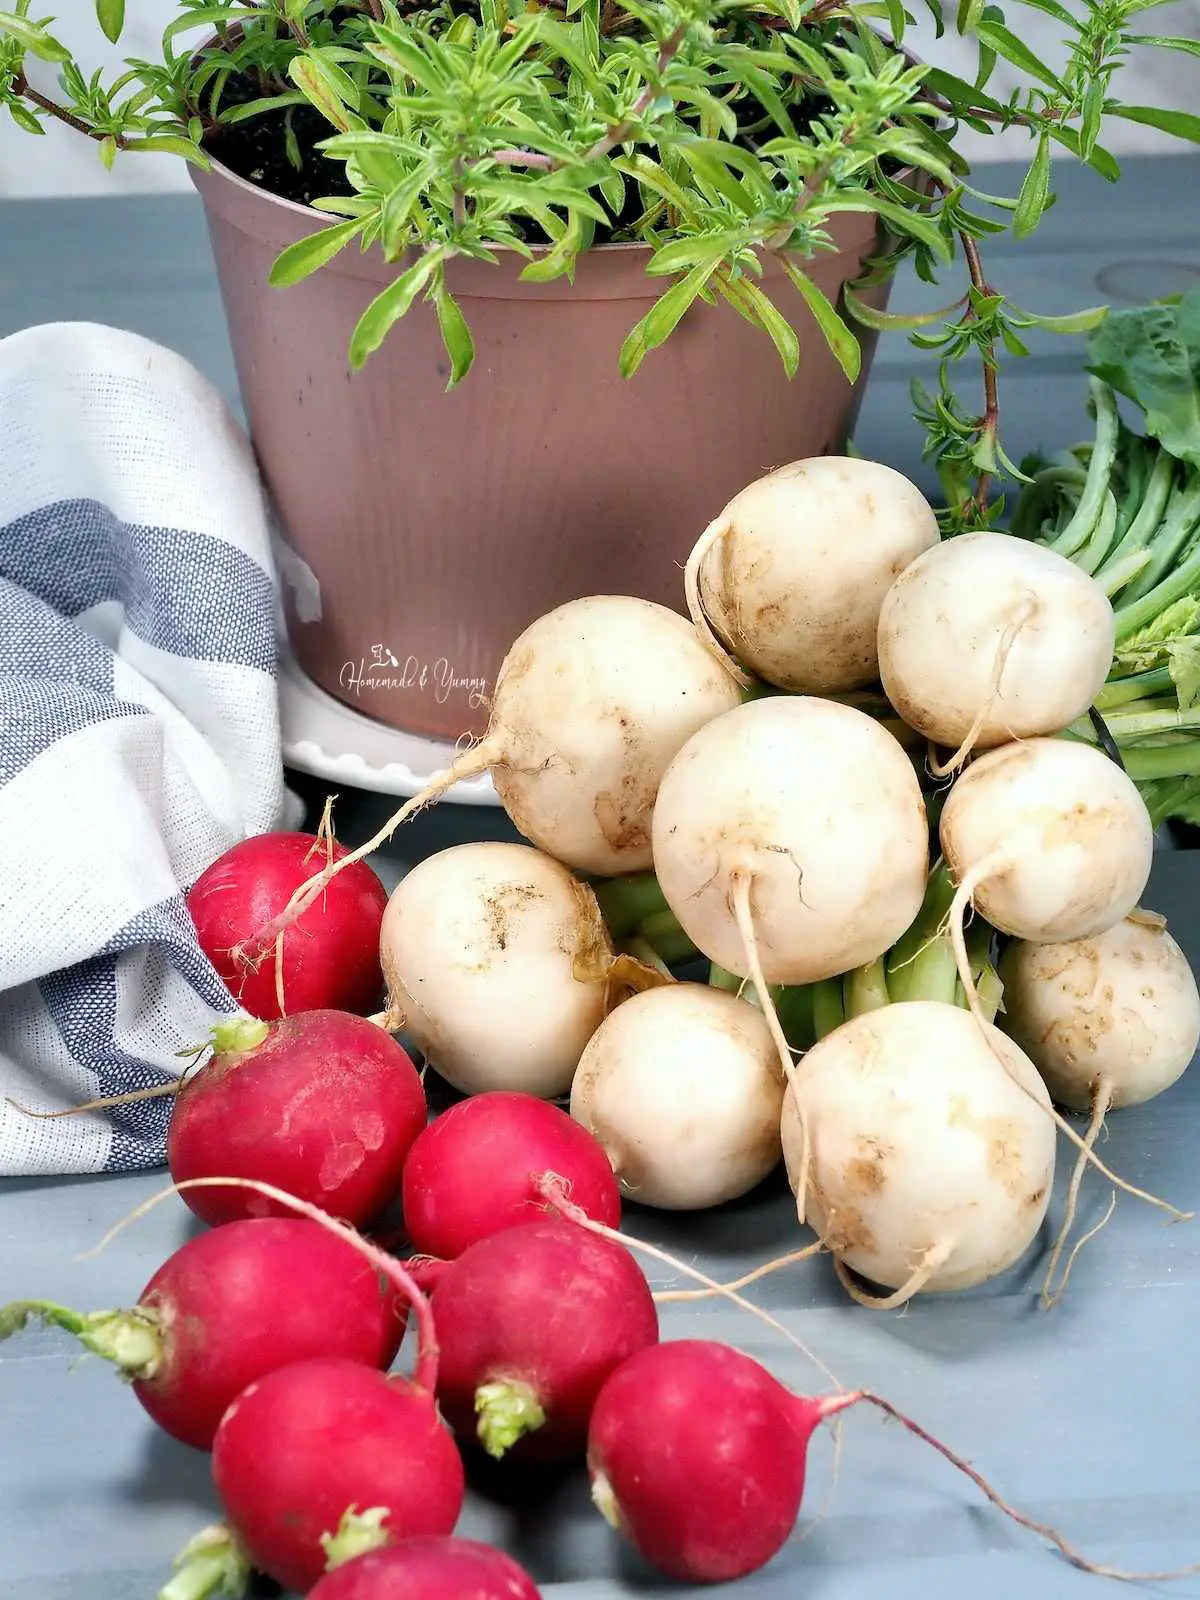 Bunches of radishes and turnips on a counter with a pot of herbs in the background.